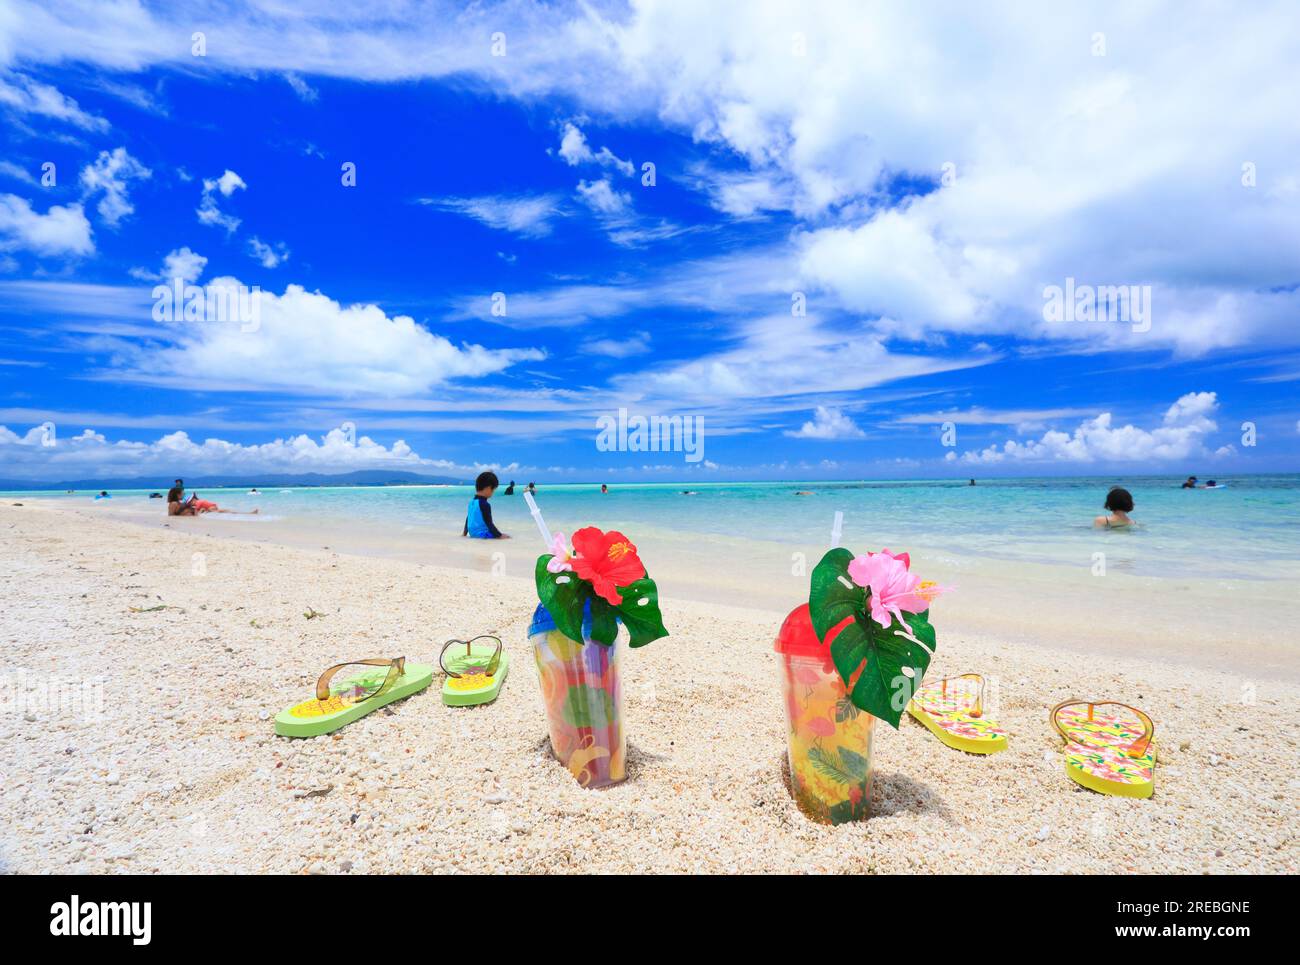 Image of a Beach in Okinawa Stock Photo